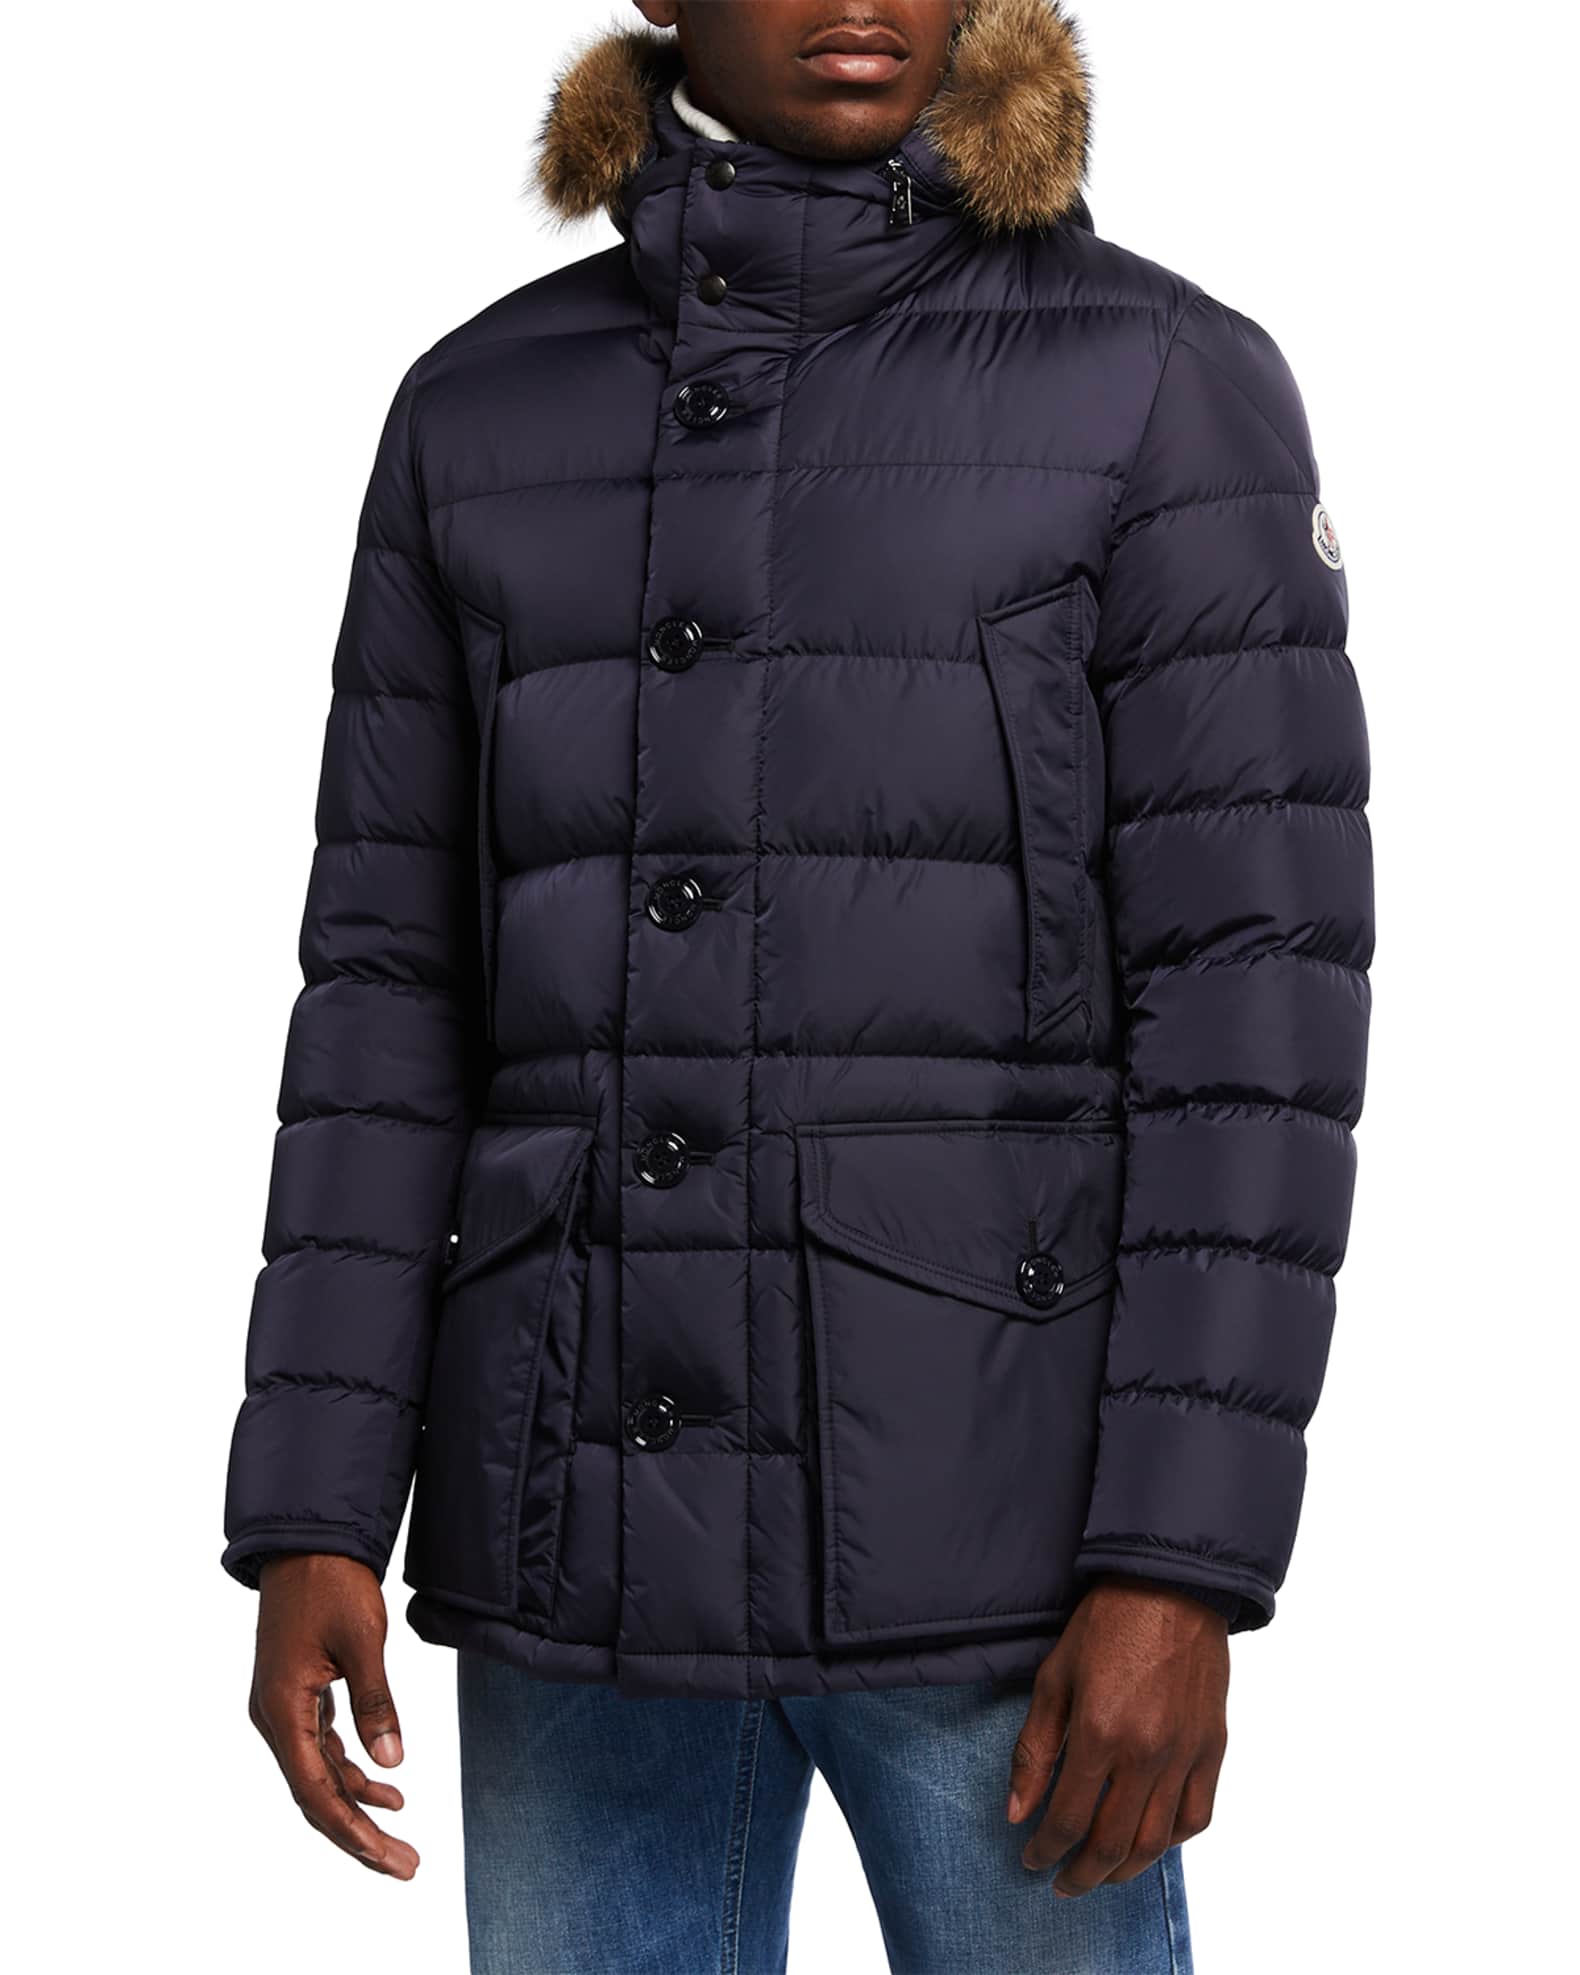 Moncler Men's Cluny Quilted Puffer Jacket w/ Fur Trim | Neiman Marcus